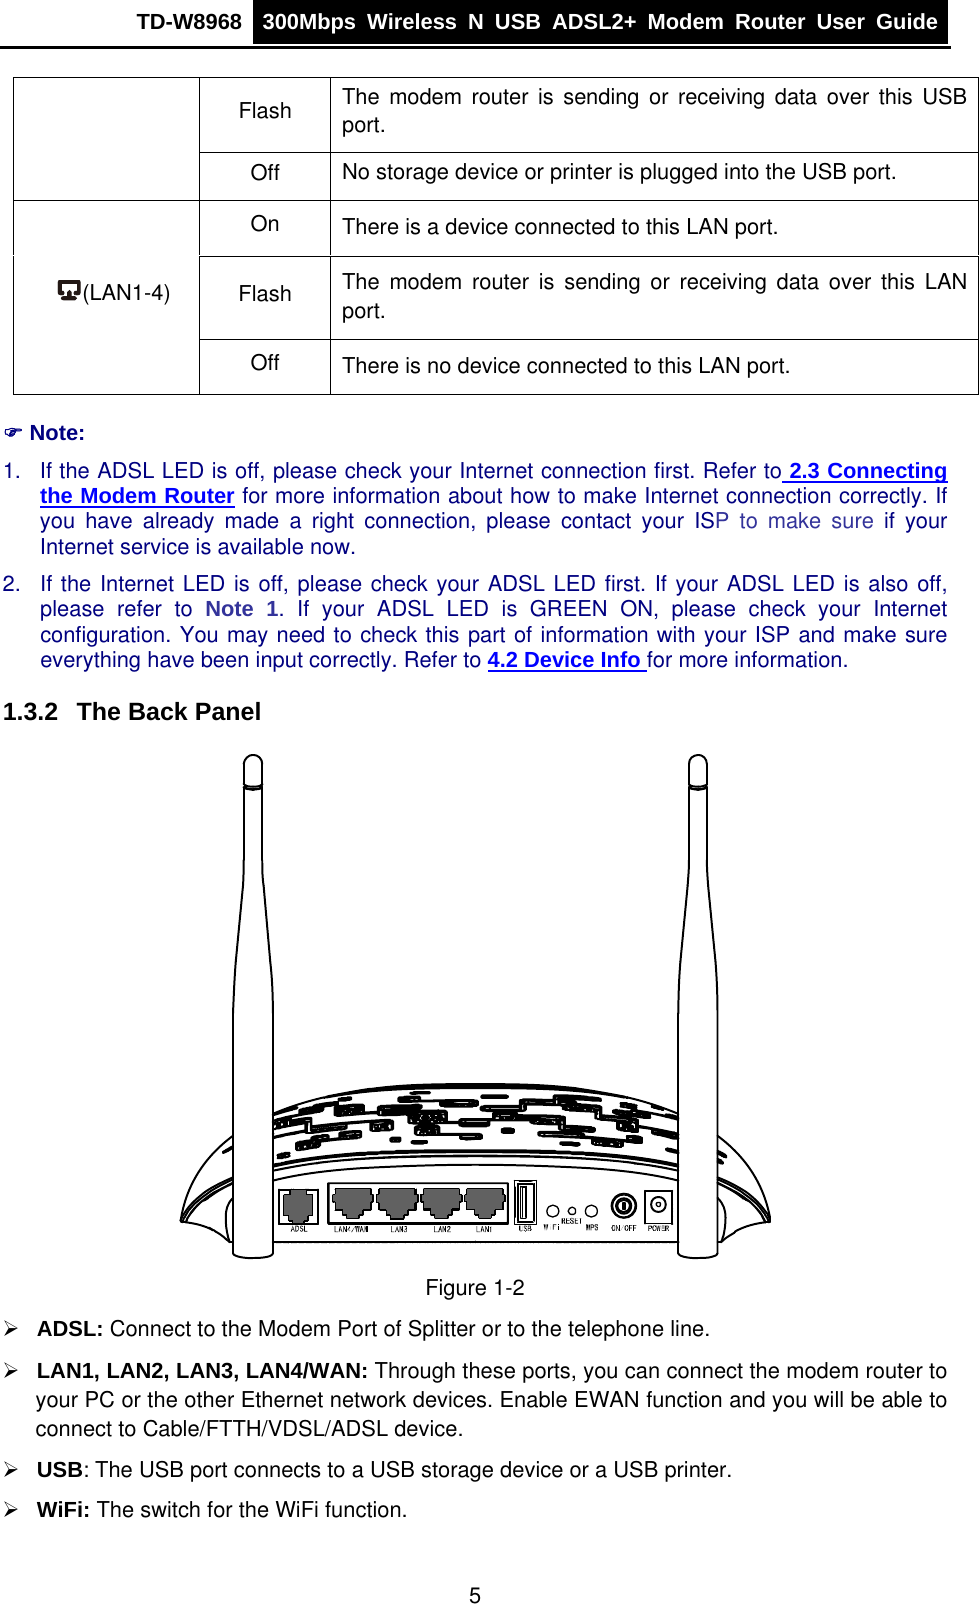 TD-W8968  300Mbps Wireless N USB ADSL2+ Modem Router User Guide  Flash  The modem router is sending or receiving data over this USB port. Off  No storage device or printer is plugged into the USB port. On There is a device connected to this LAN port. Flash The modem router is sending or receiving data over this LAN port. (LAN1-4) Off There is no device connected to this LAN port. ) Note: 1.  If the ADSL LED is off, please check your Internet connection first. Refer to 2.3 Connecting the Modem Router for more information about how to make Internet connection correctly. If you have already made a right connection, please contact your ISP to make sure if your Internet service is available now. 2.  If the Internet LED is off, please check your ADSL LED first. If your ADSL LED is also off, please refer to Note 1. If your ADSL LED is GREEN ON, please check your Internet configuration. You may need to check this part of information with your ISP and make sure everything have been input correctly. Refer to 4.2 Device Info for more information. 1.3.2  The Back Panel  Figure 1-2 ¾ ADSL: Connect to the Modem Port of Splitter or to the telephone line. ¾ LAN1, LAN2, LAN3, LAN4/WAN: Through these ports, you can connect the modem router to your PC or the other Ethernet network devices. Enable EWAN function and you will be able to connect to Cable/FTTH/VDSL/ADSL device. ¾ USB: The USB port connects to a USB storage device or a USB printer. ¾ WiFi: The switch for the WiFi function. 5 